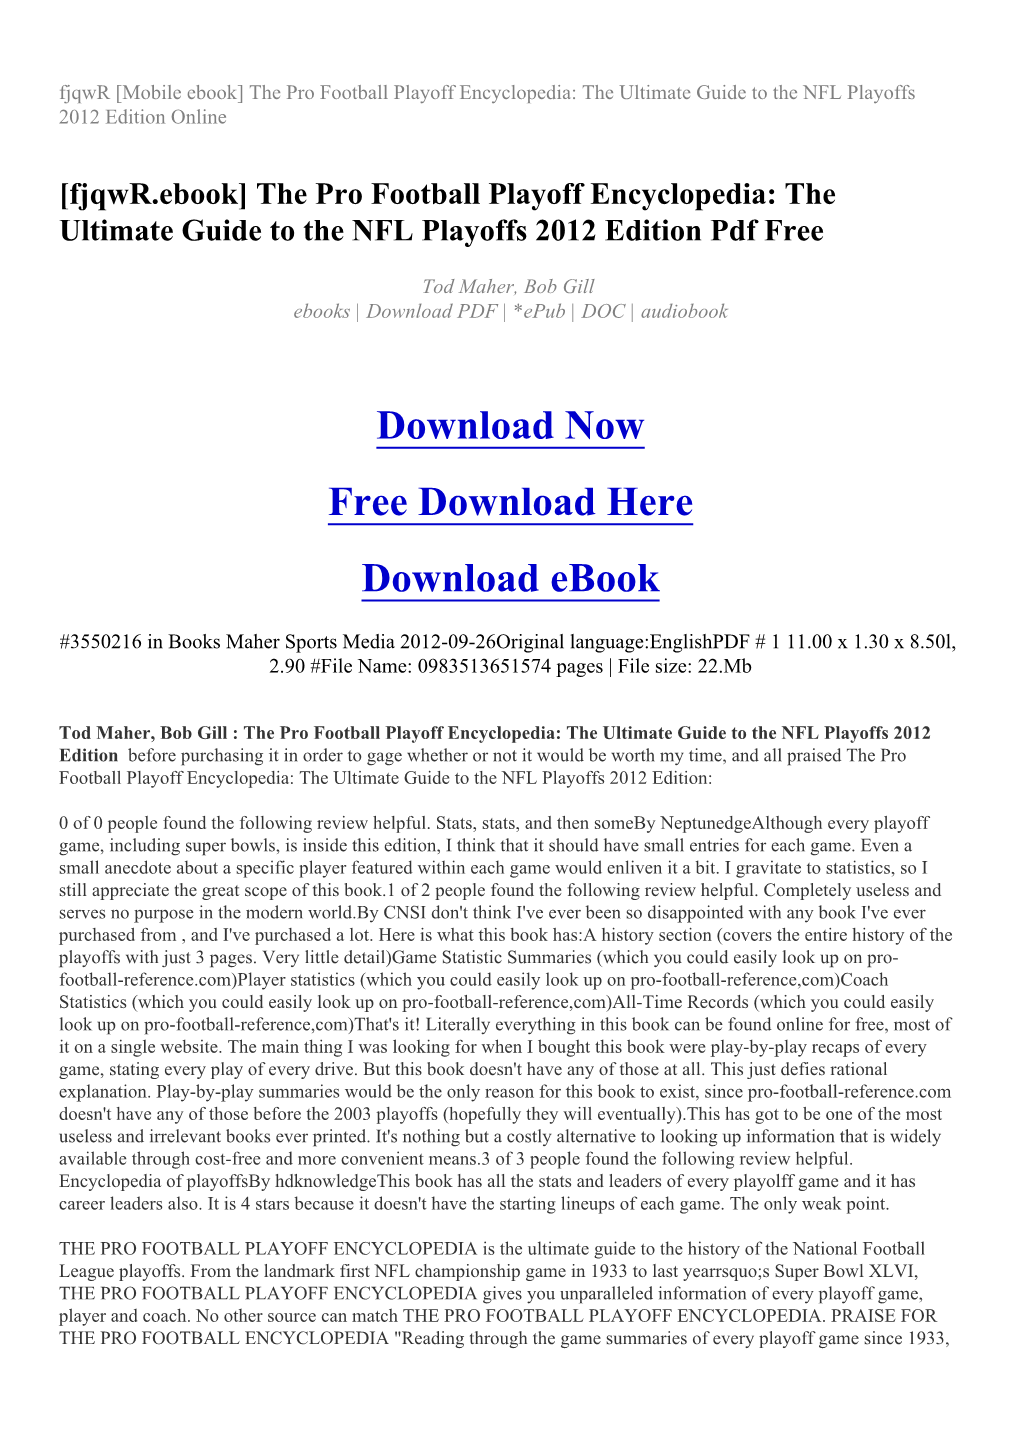 The Pro Football Playoff Encyclopedia: the Ultimate Guide to the NFL Playoffs 2012 Edition Online